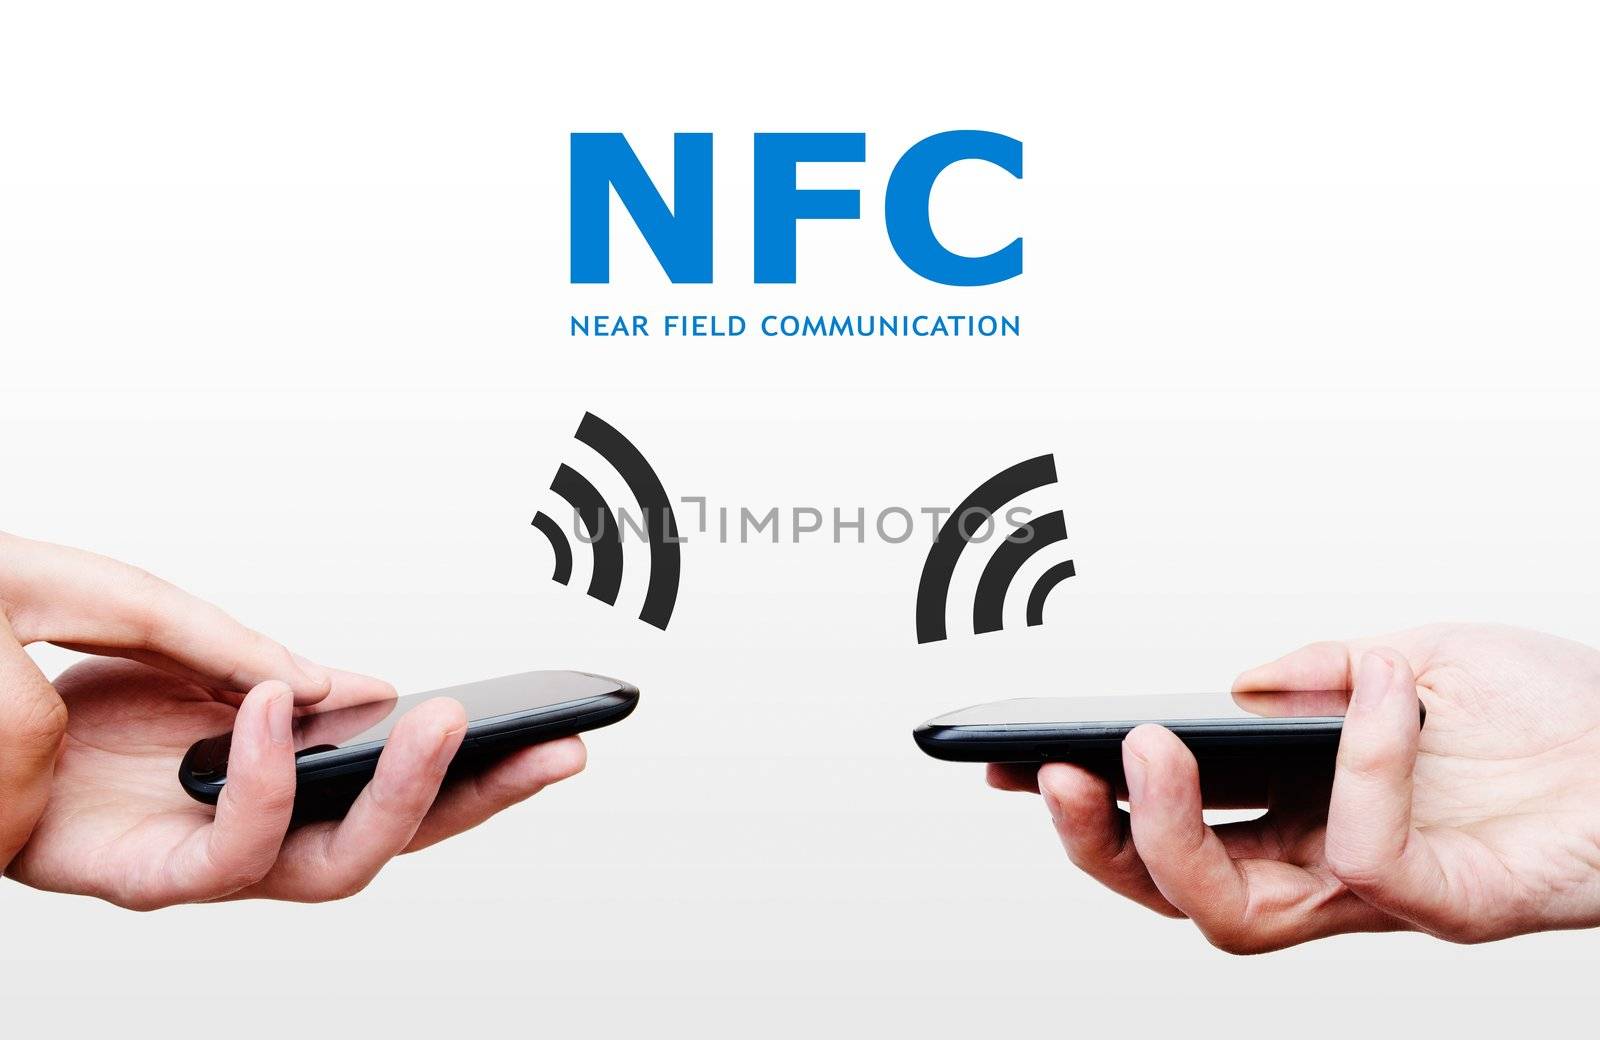 Two mobile phones with NFC payment technology. Near field commun by simpson33